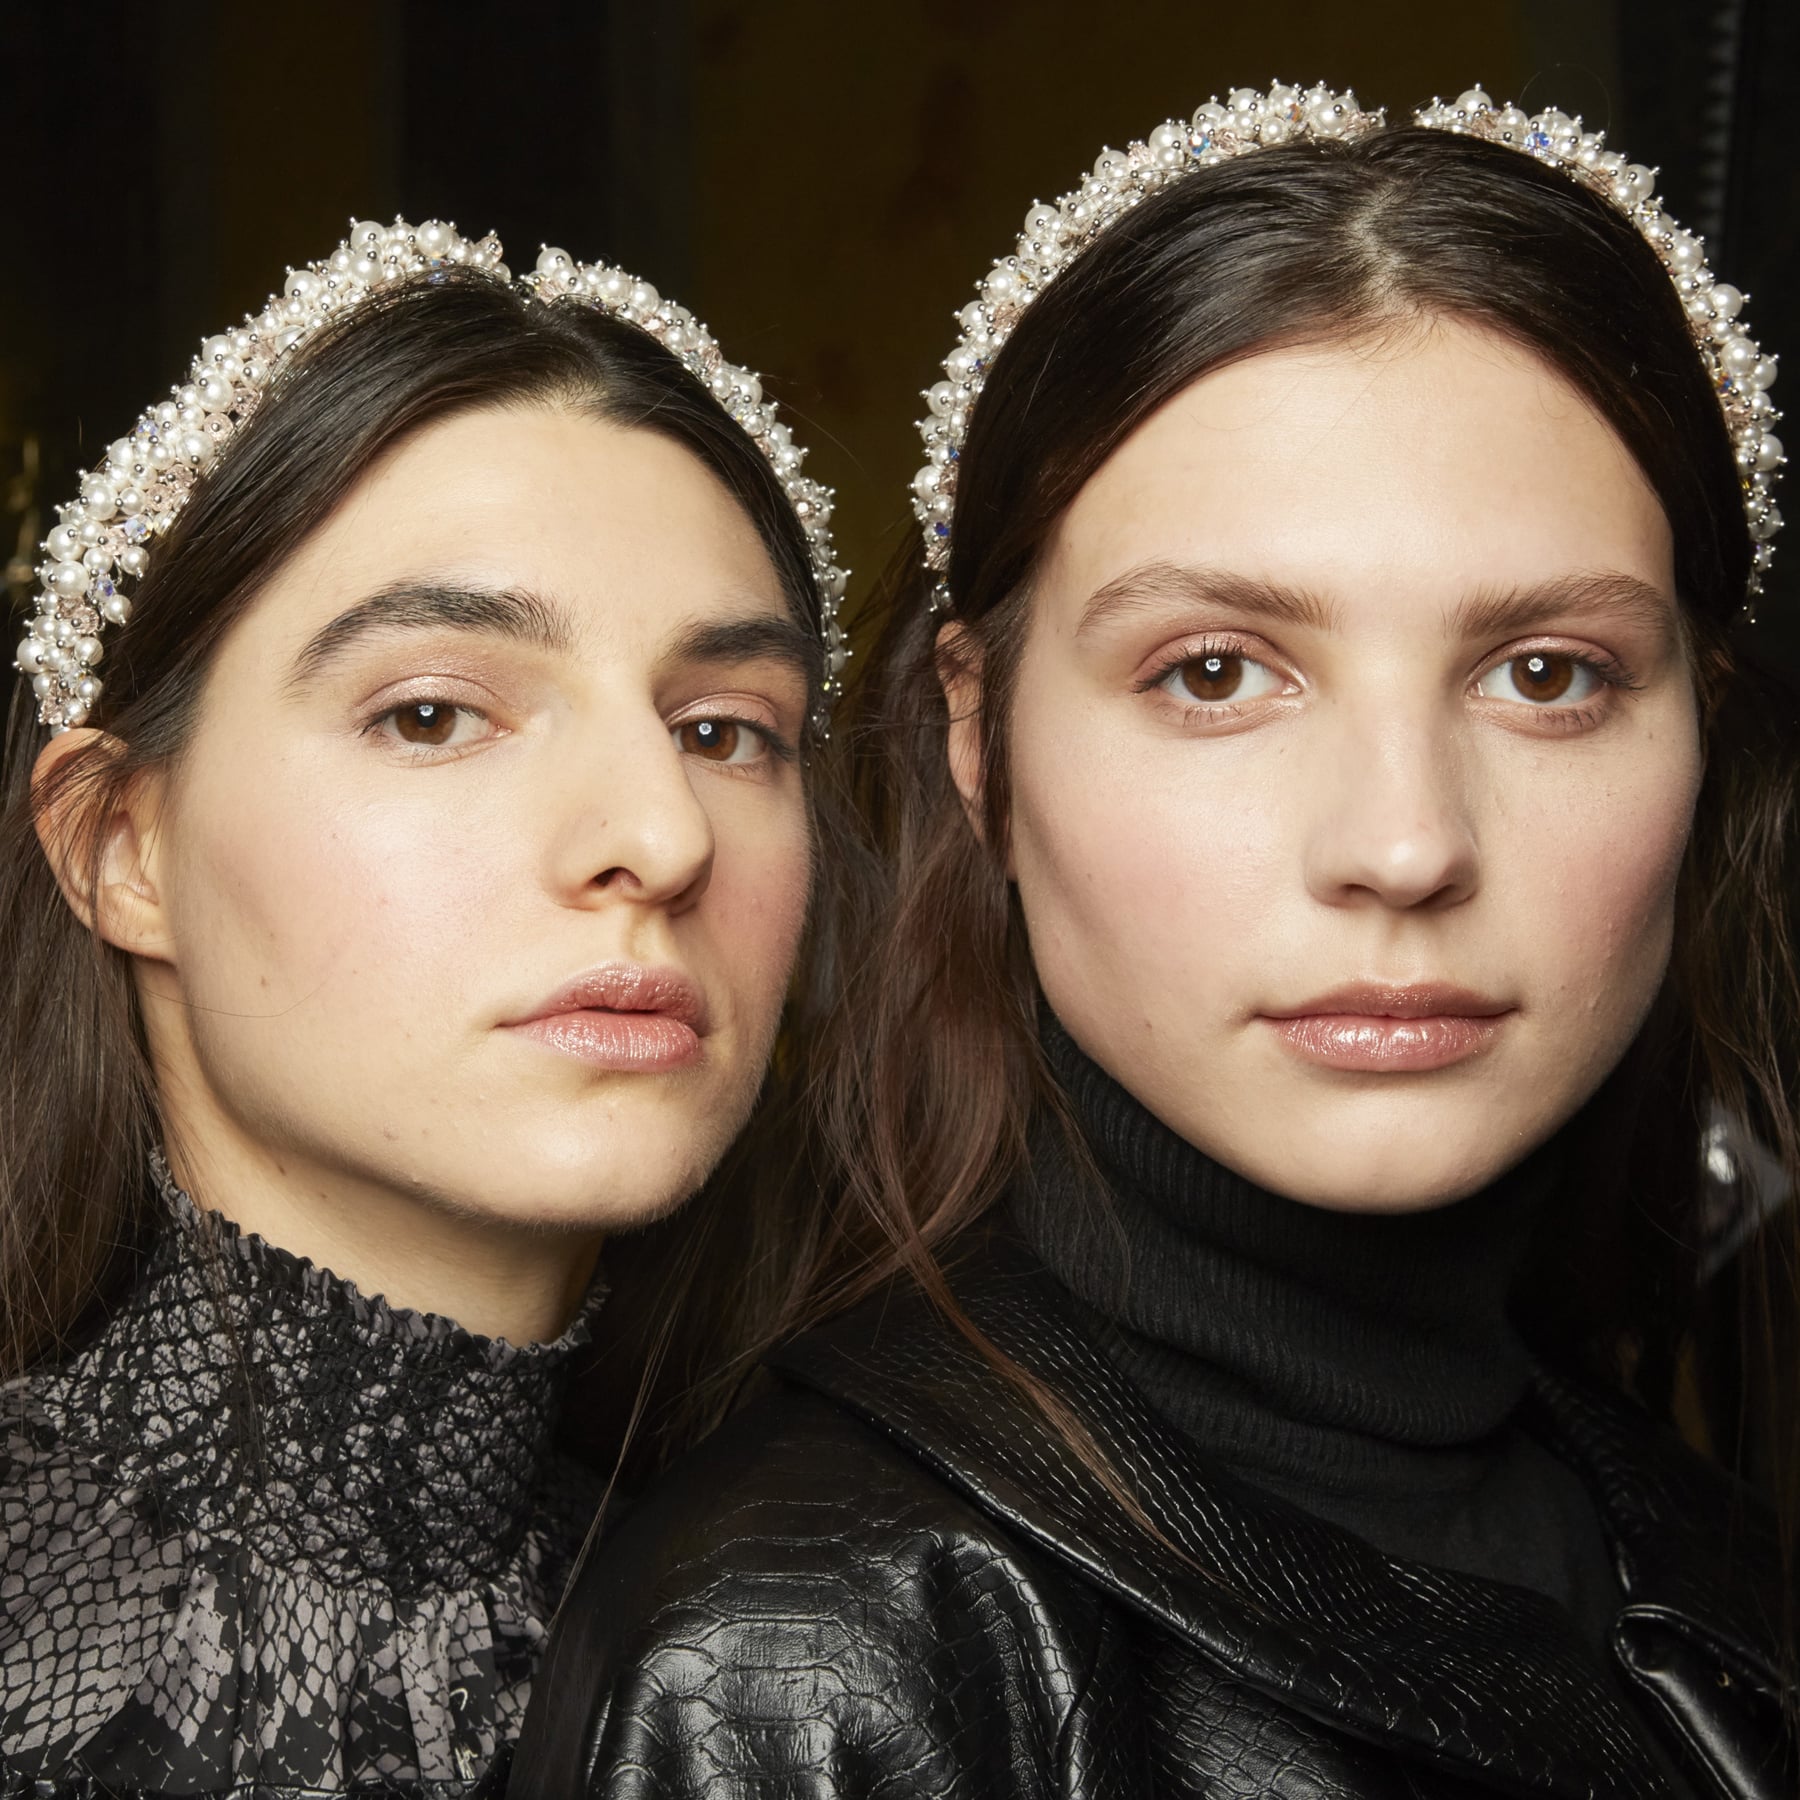 The Most Stylish Hair Accessories Trends For Autumn 2019